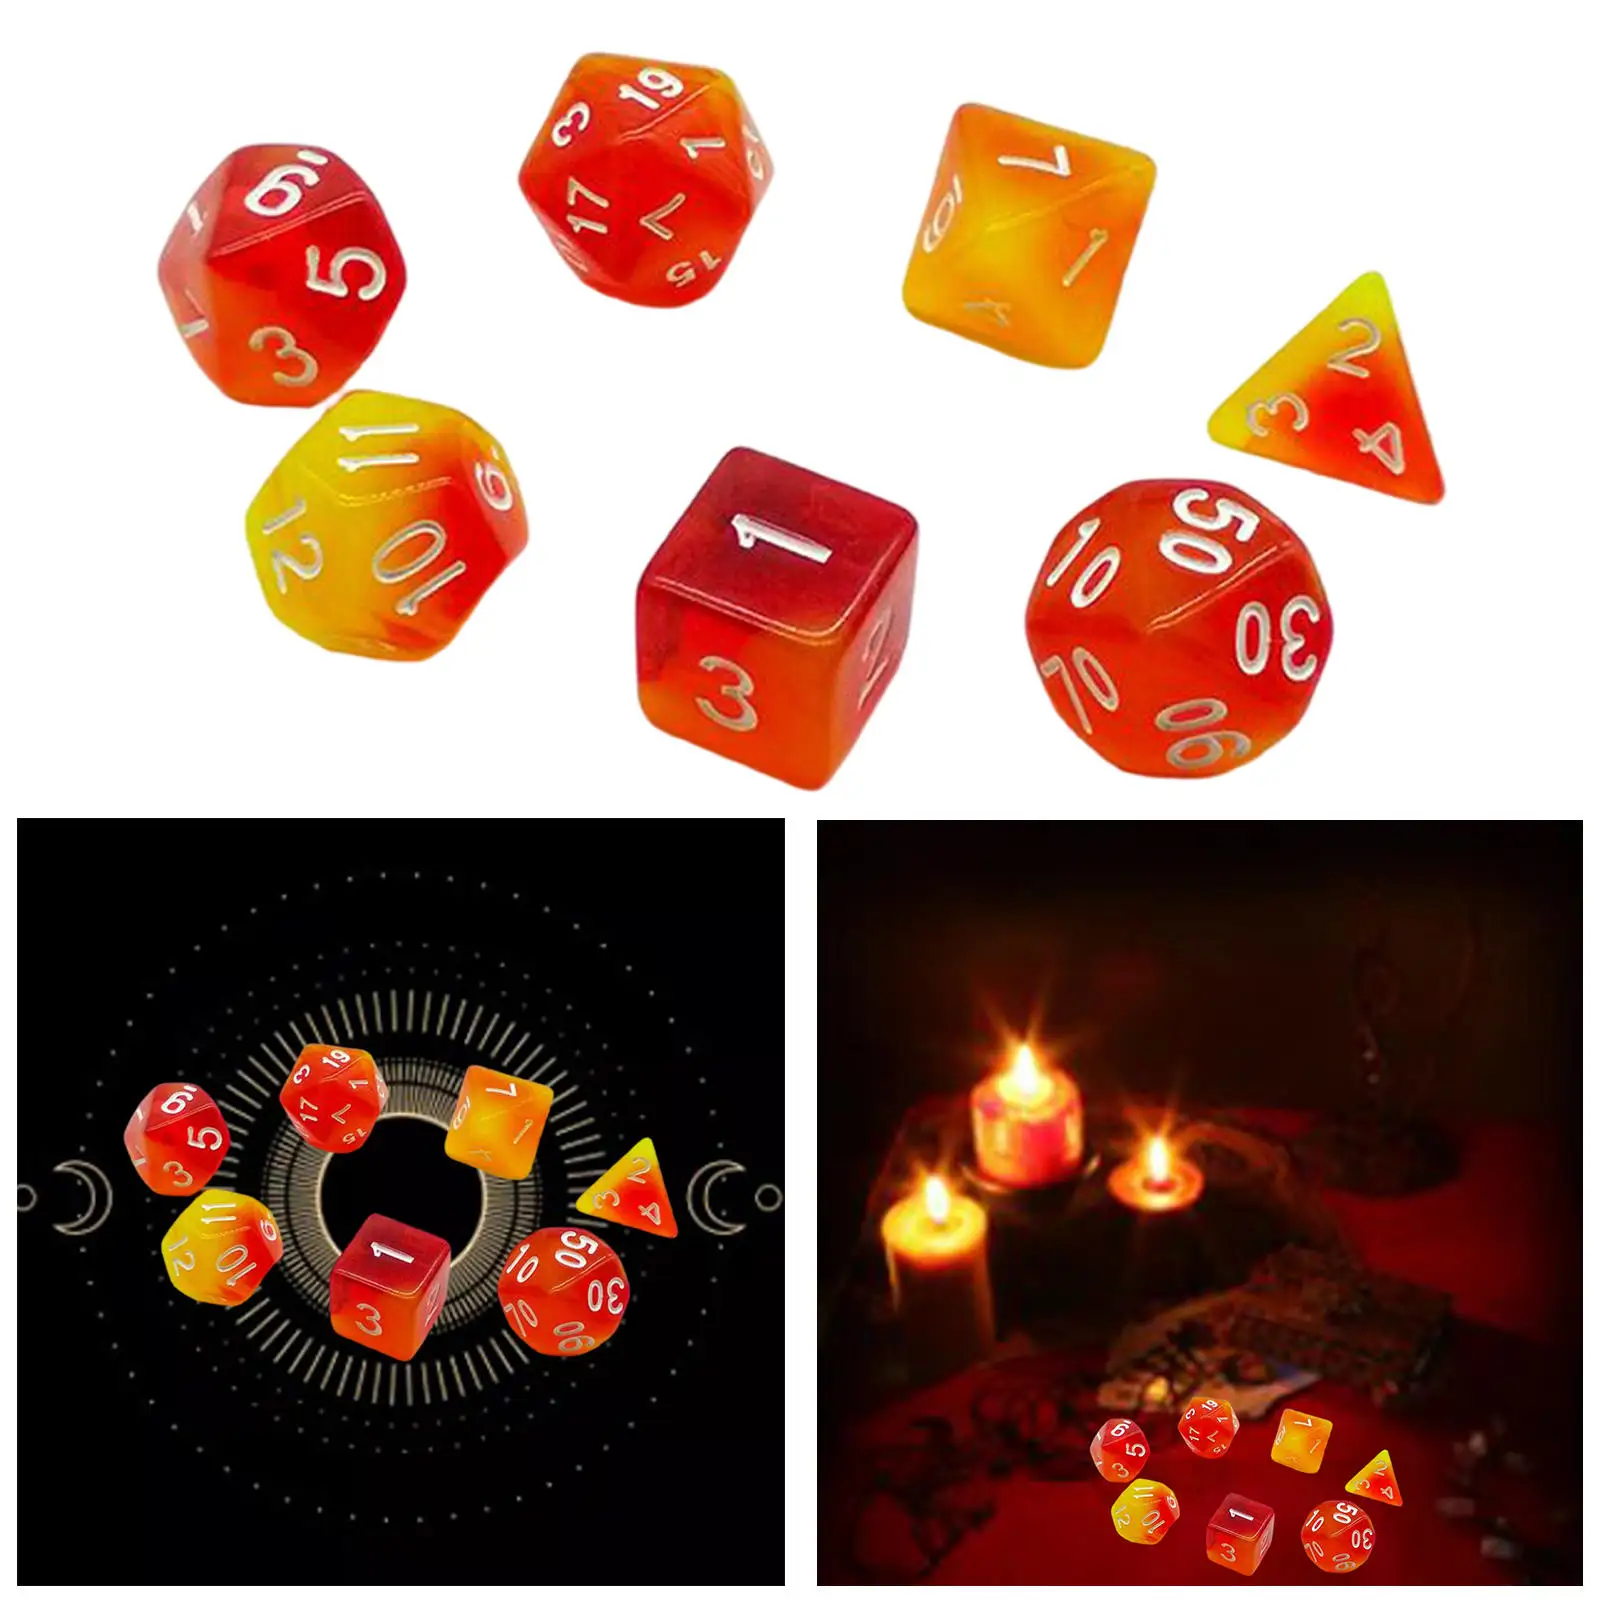 7 Pieces Multi Sides Dice,TRPG DND Games,Role Playing Game Party Favor,Polyhedral Dice for DND RPG MTG Bar Toys Casino War Game